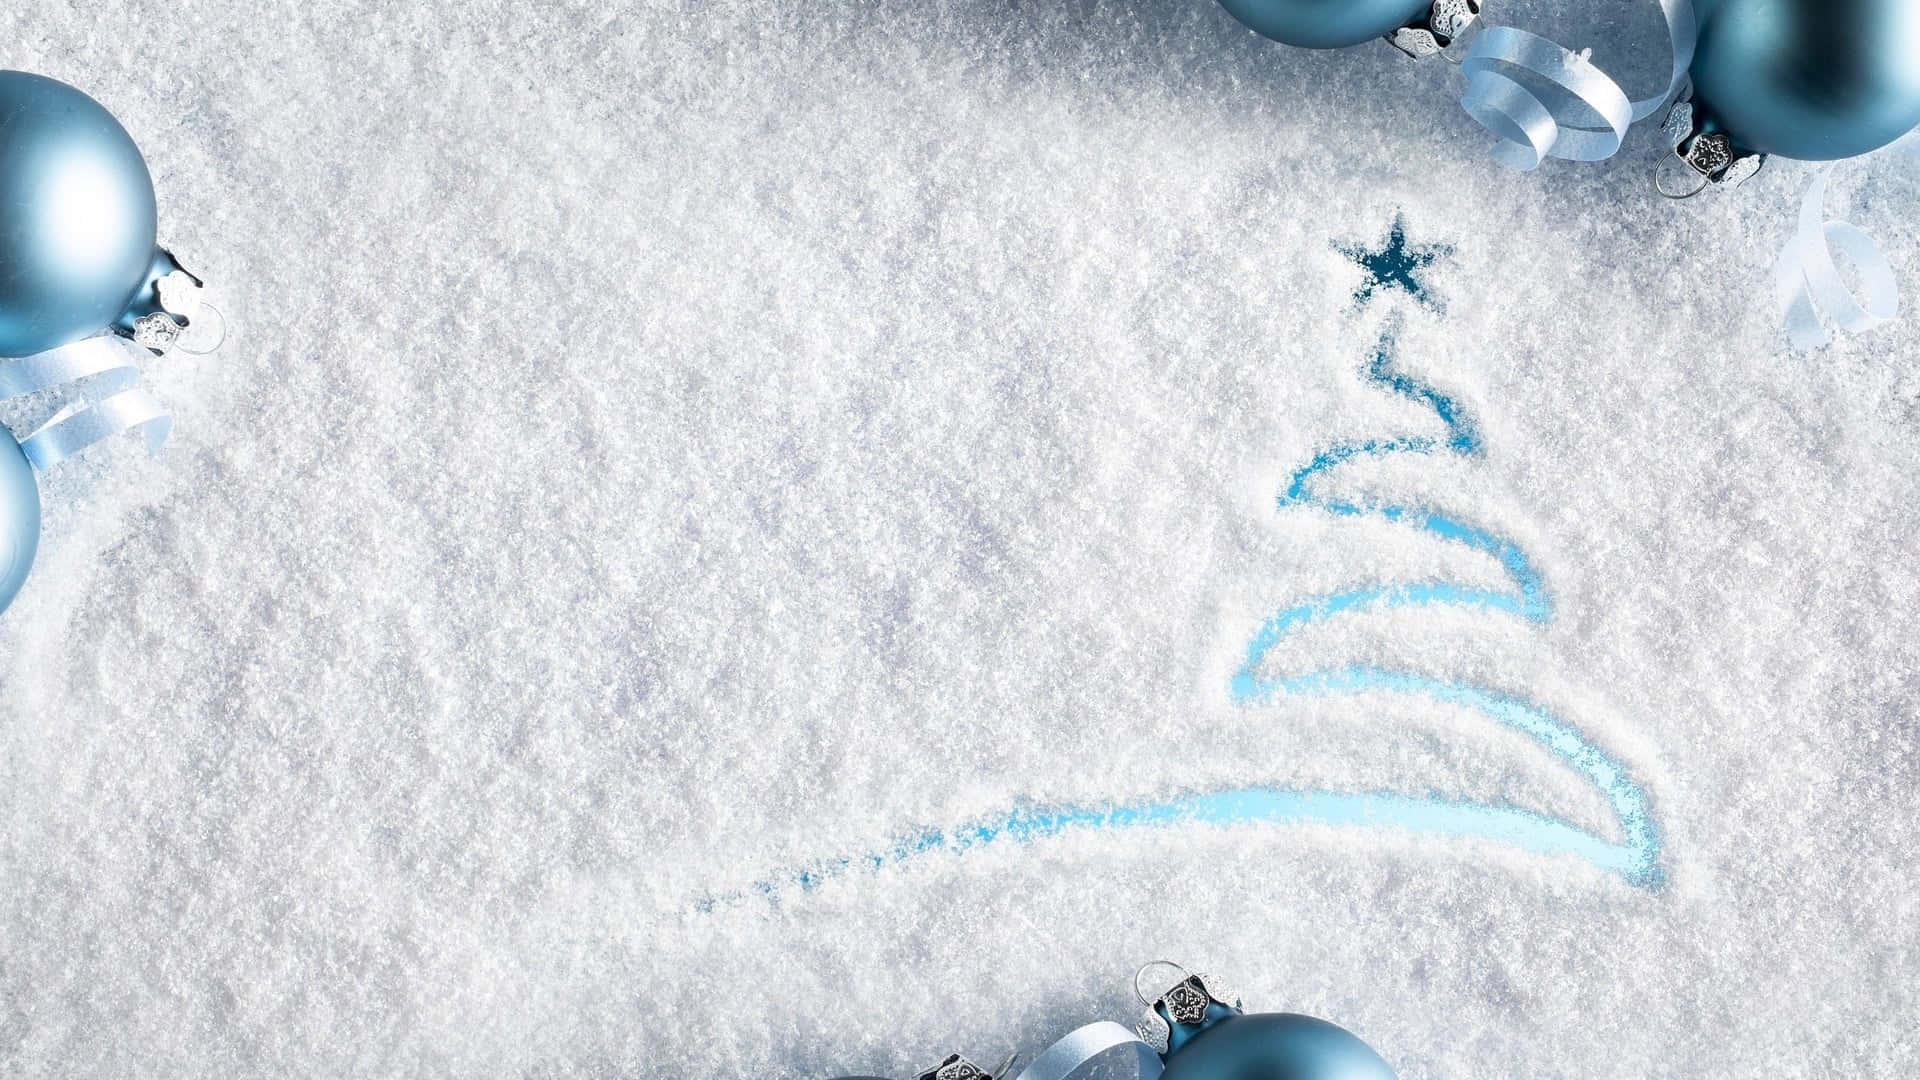 A Blue Christmas Tree Is Drawn On The Snow Wallpaper